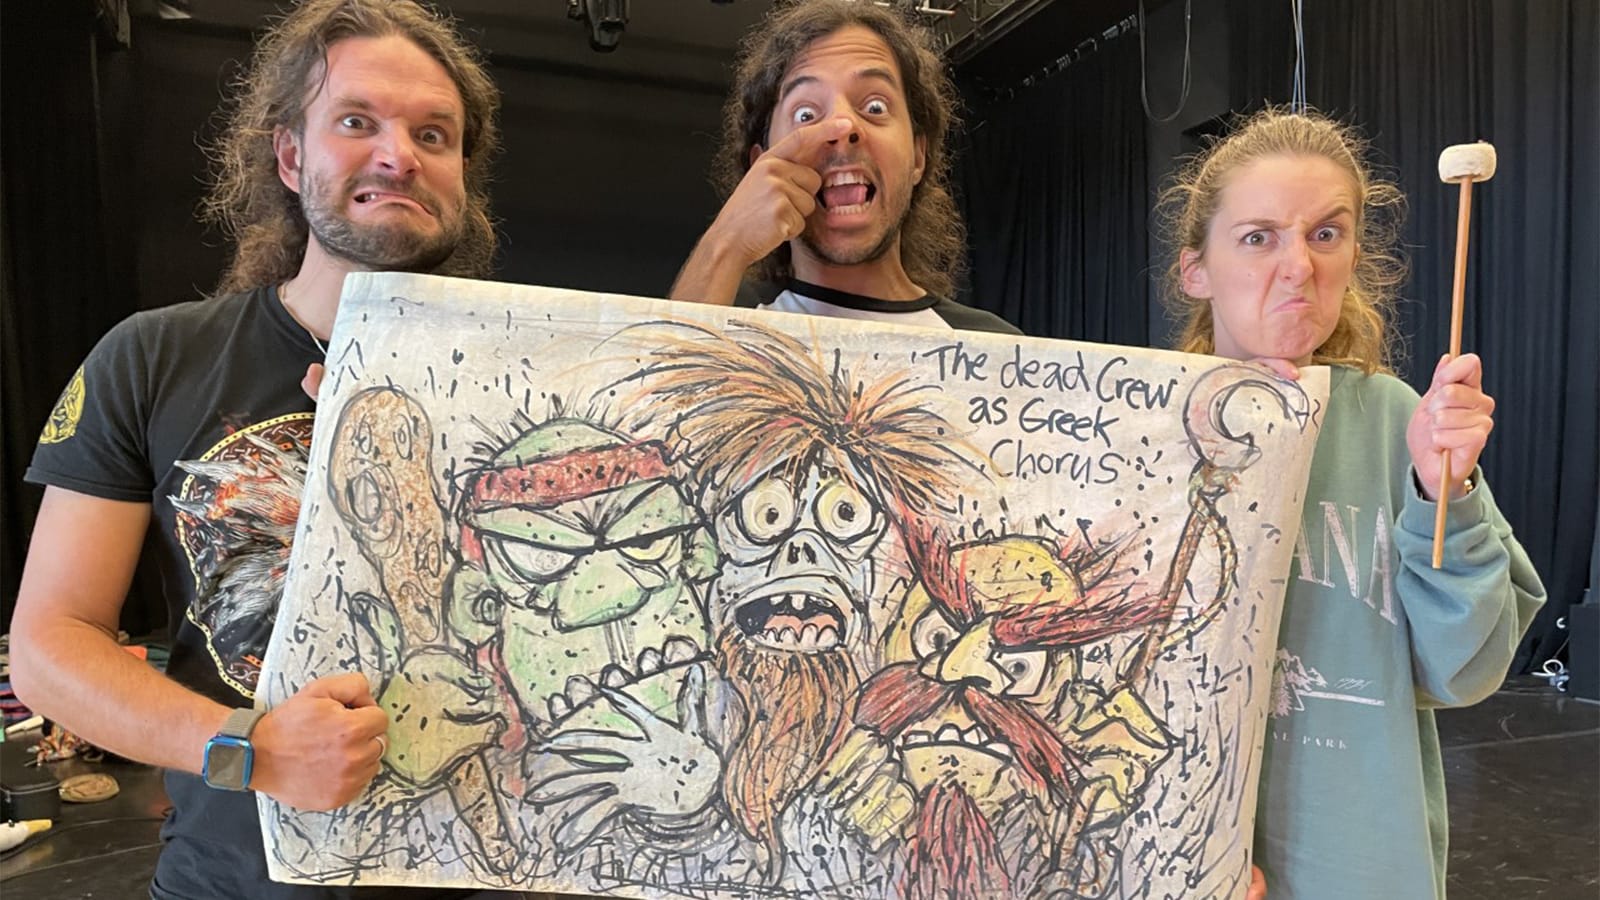 Three performers hold up an image of pirates